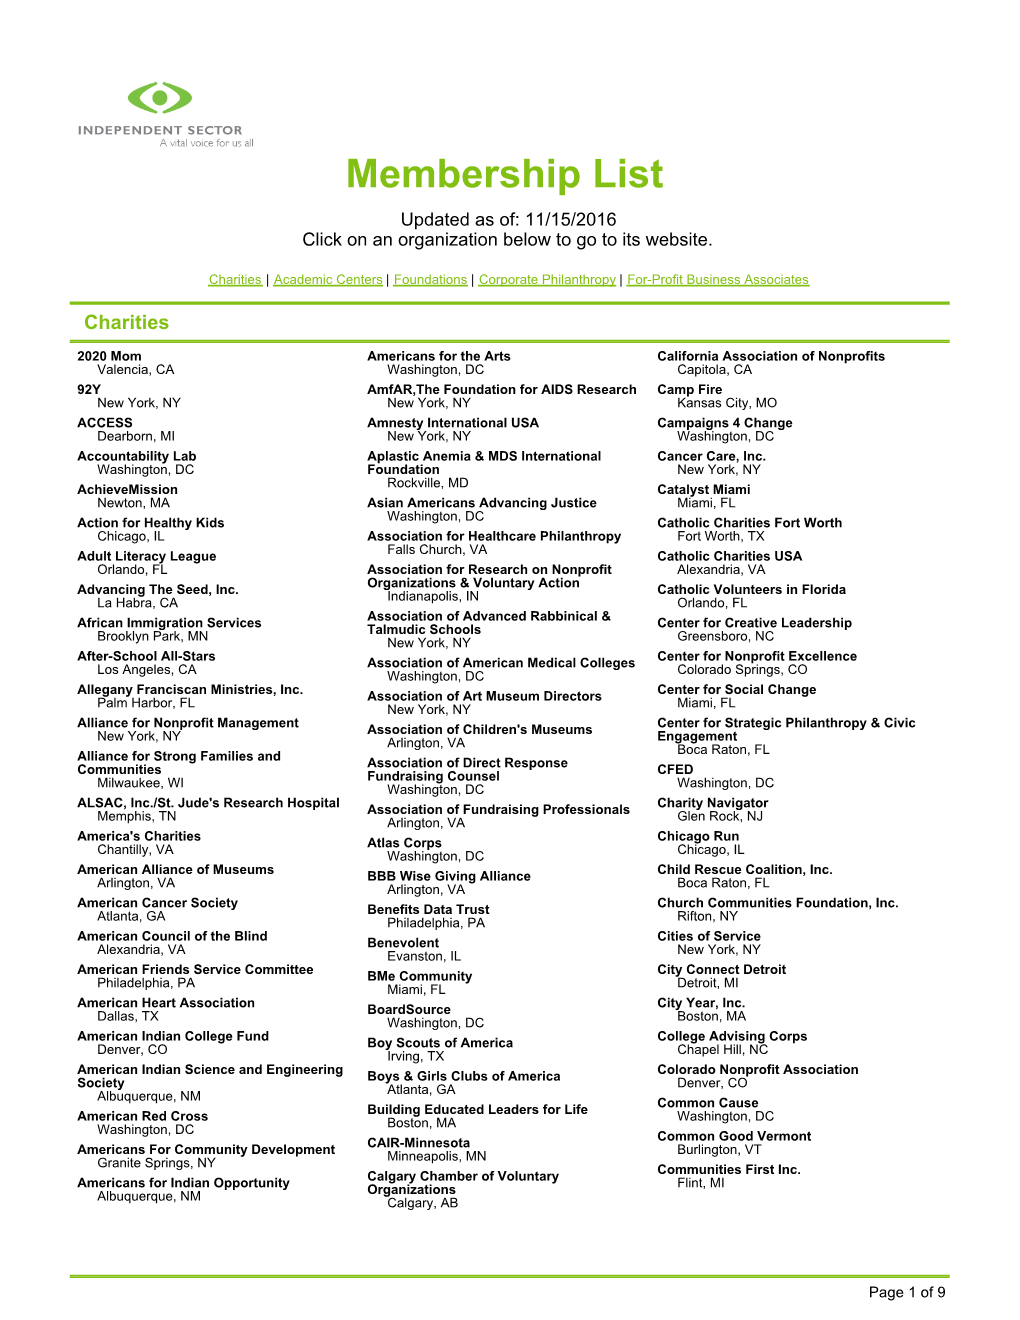 Membership List Updated As Of: 11/15/2016 Click on an Organization Below to Go to Its Website